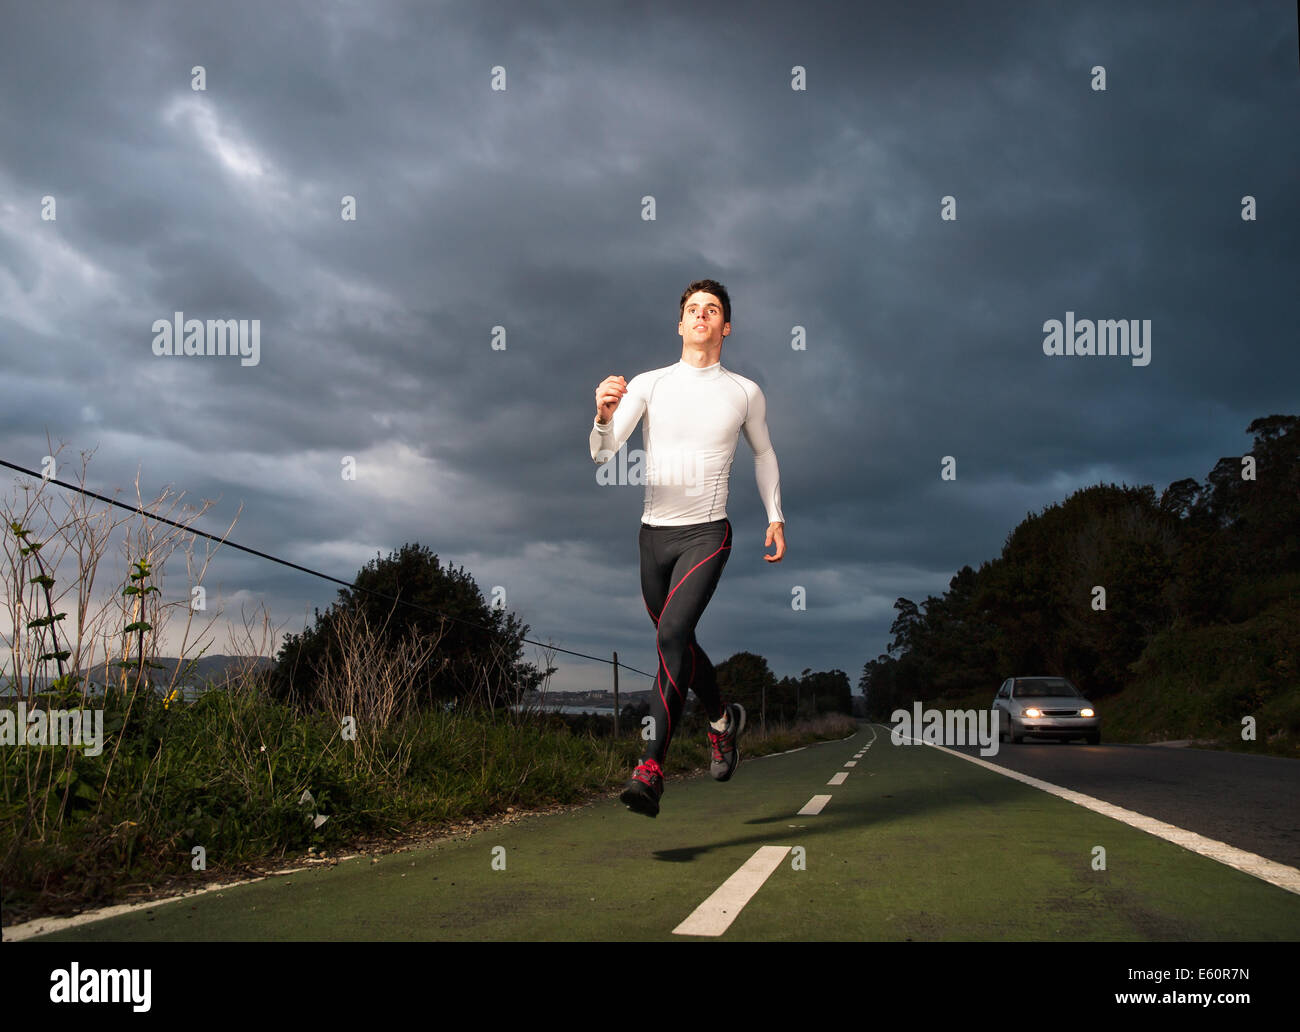 Runner man in the road at night outdoors Stock Photo